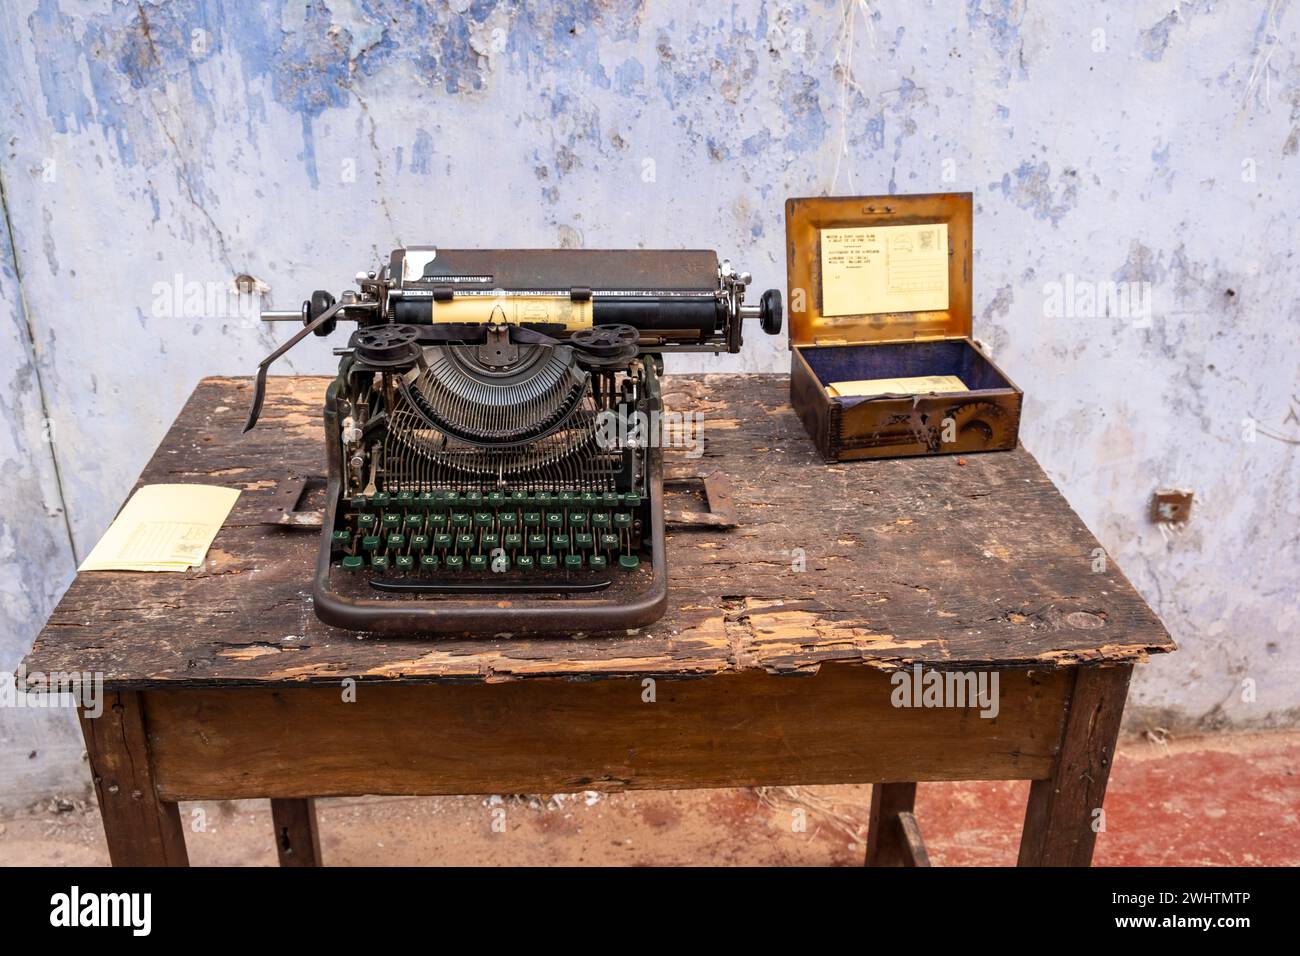 An old typewriter repurposed as a piece of art, on display in Mattancherry's Jew Town, Cochin, Kerala, India Stock Photo